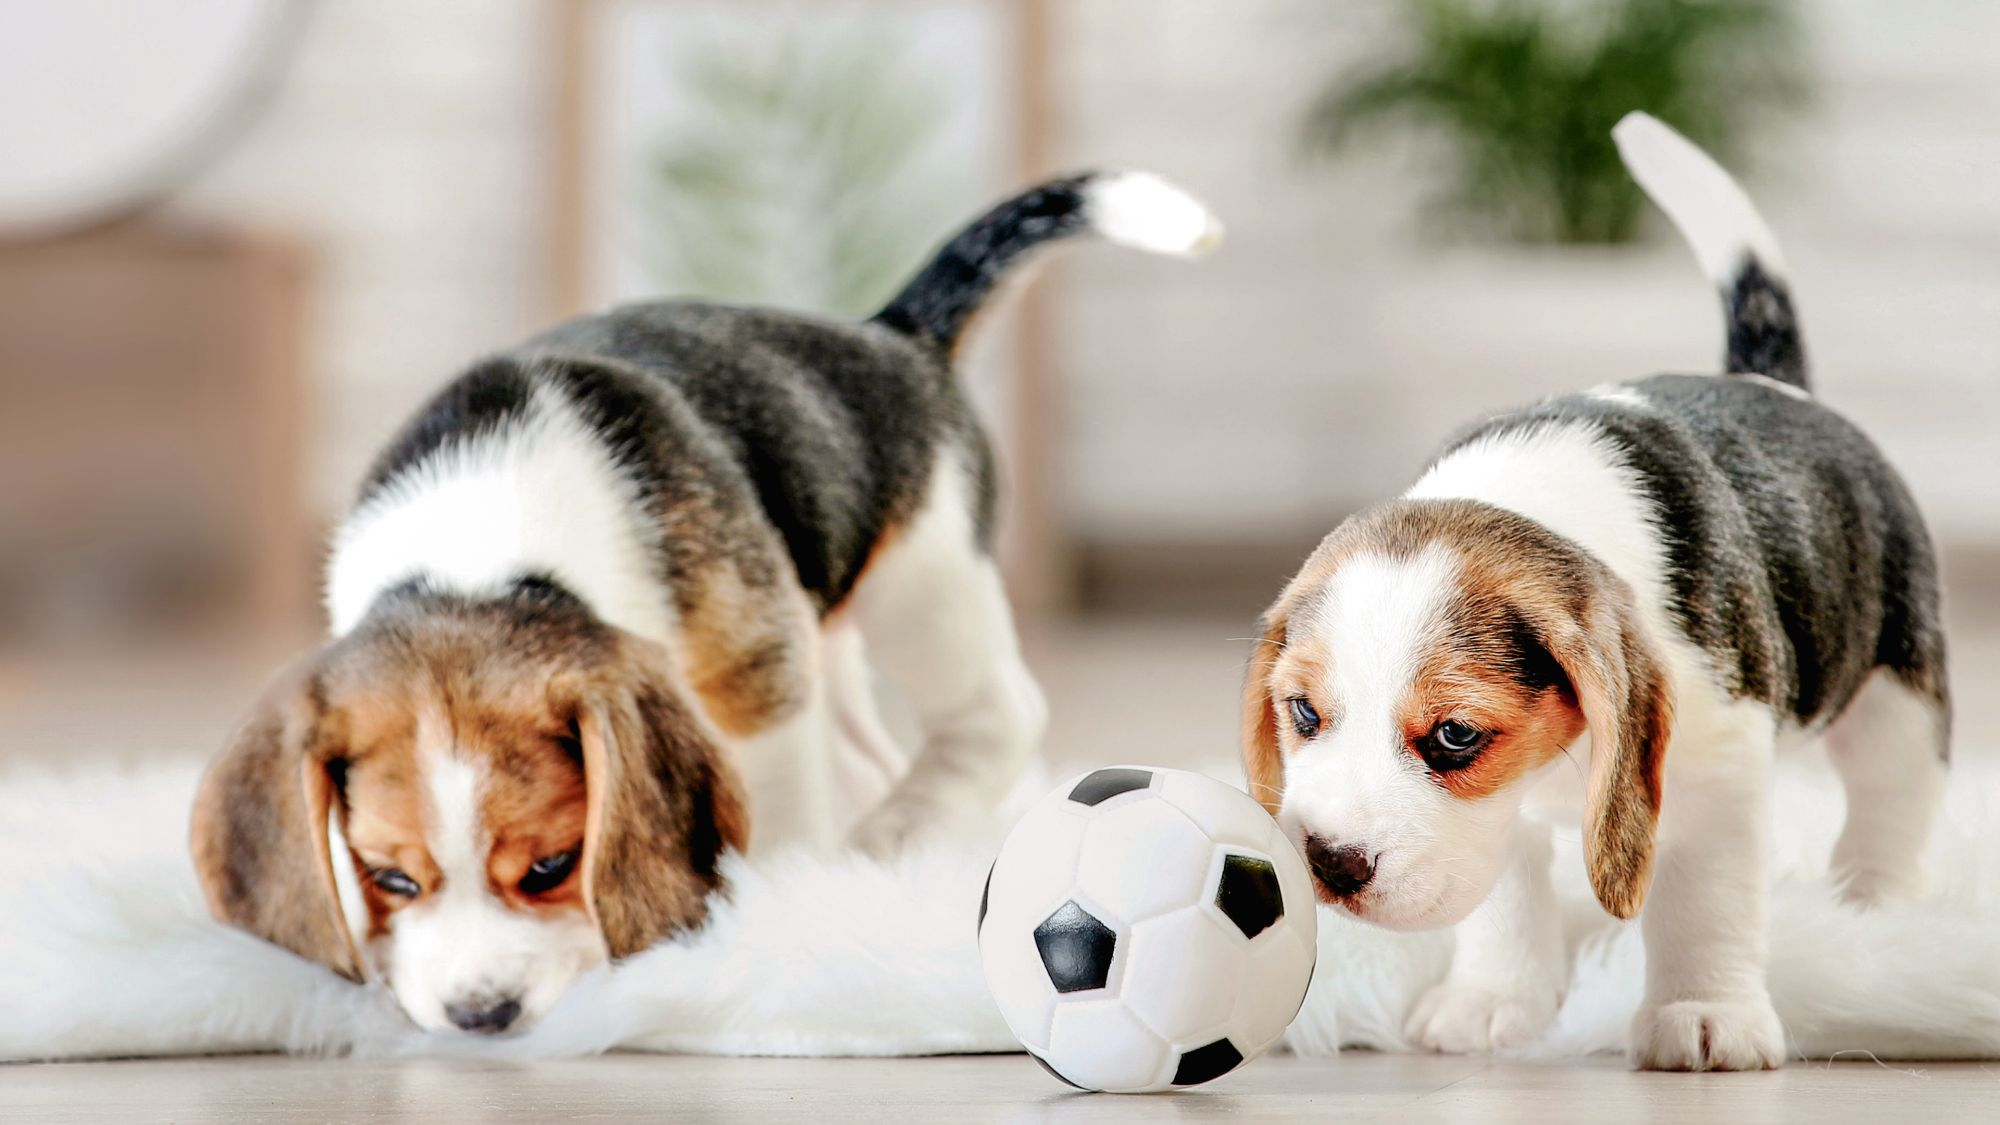 Beagle puppies standing on a rug indoors playing with a ball